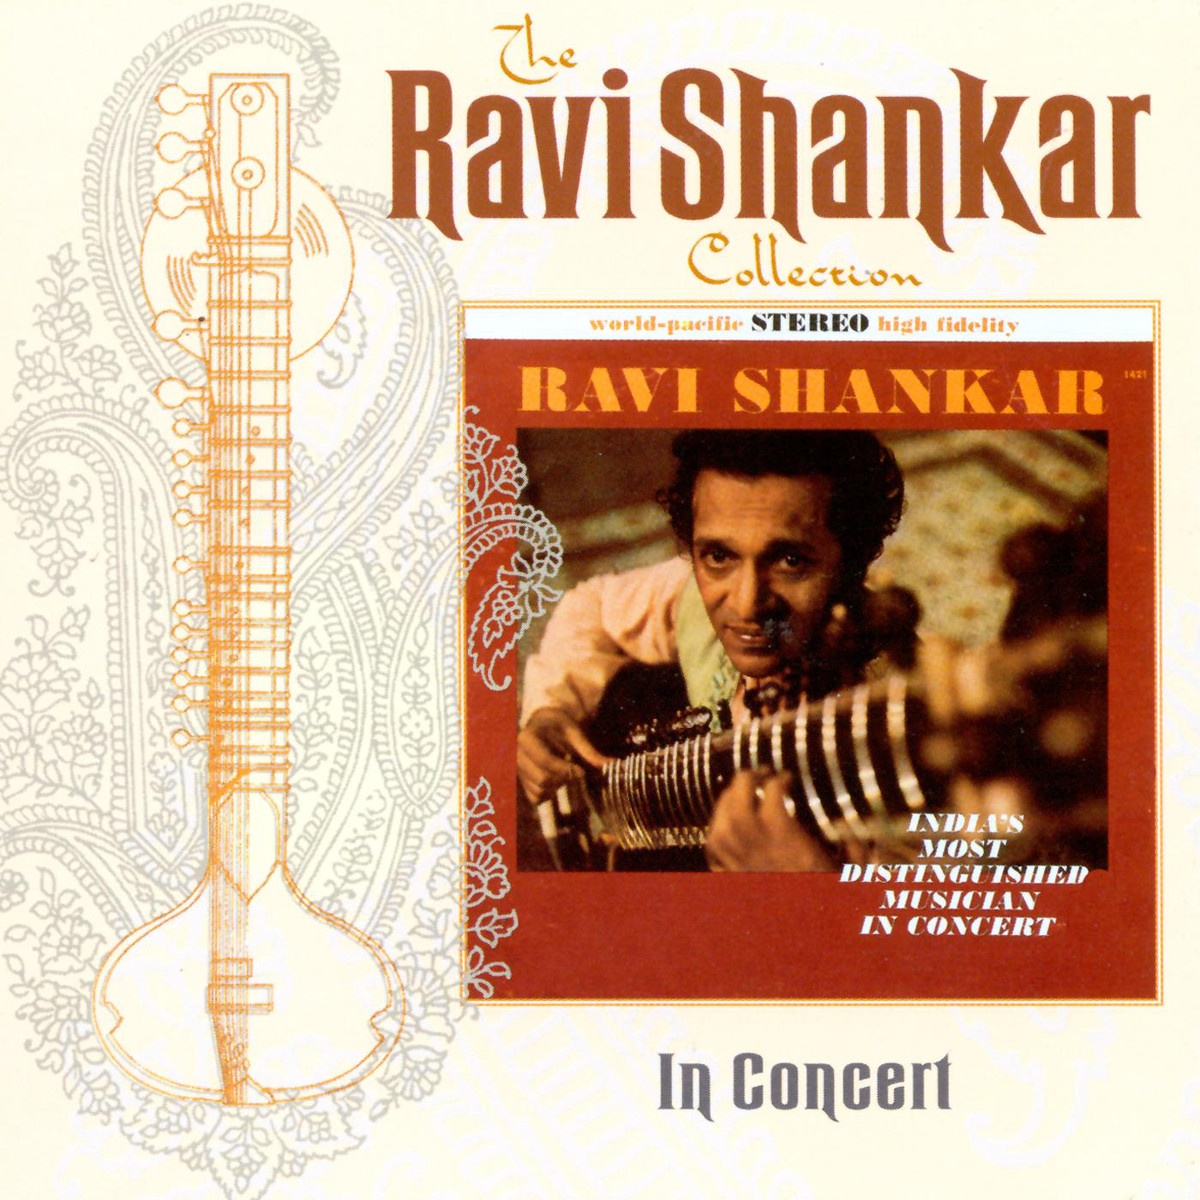 The Ravi Shankar Collection: In Concert